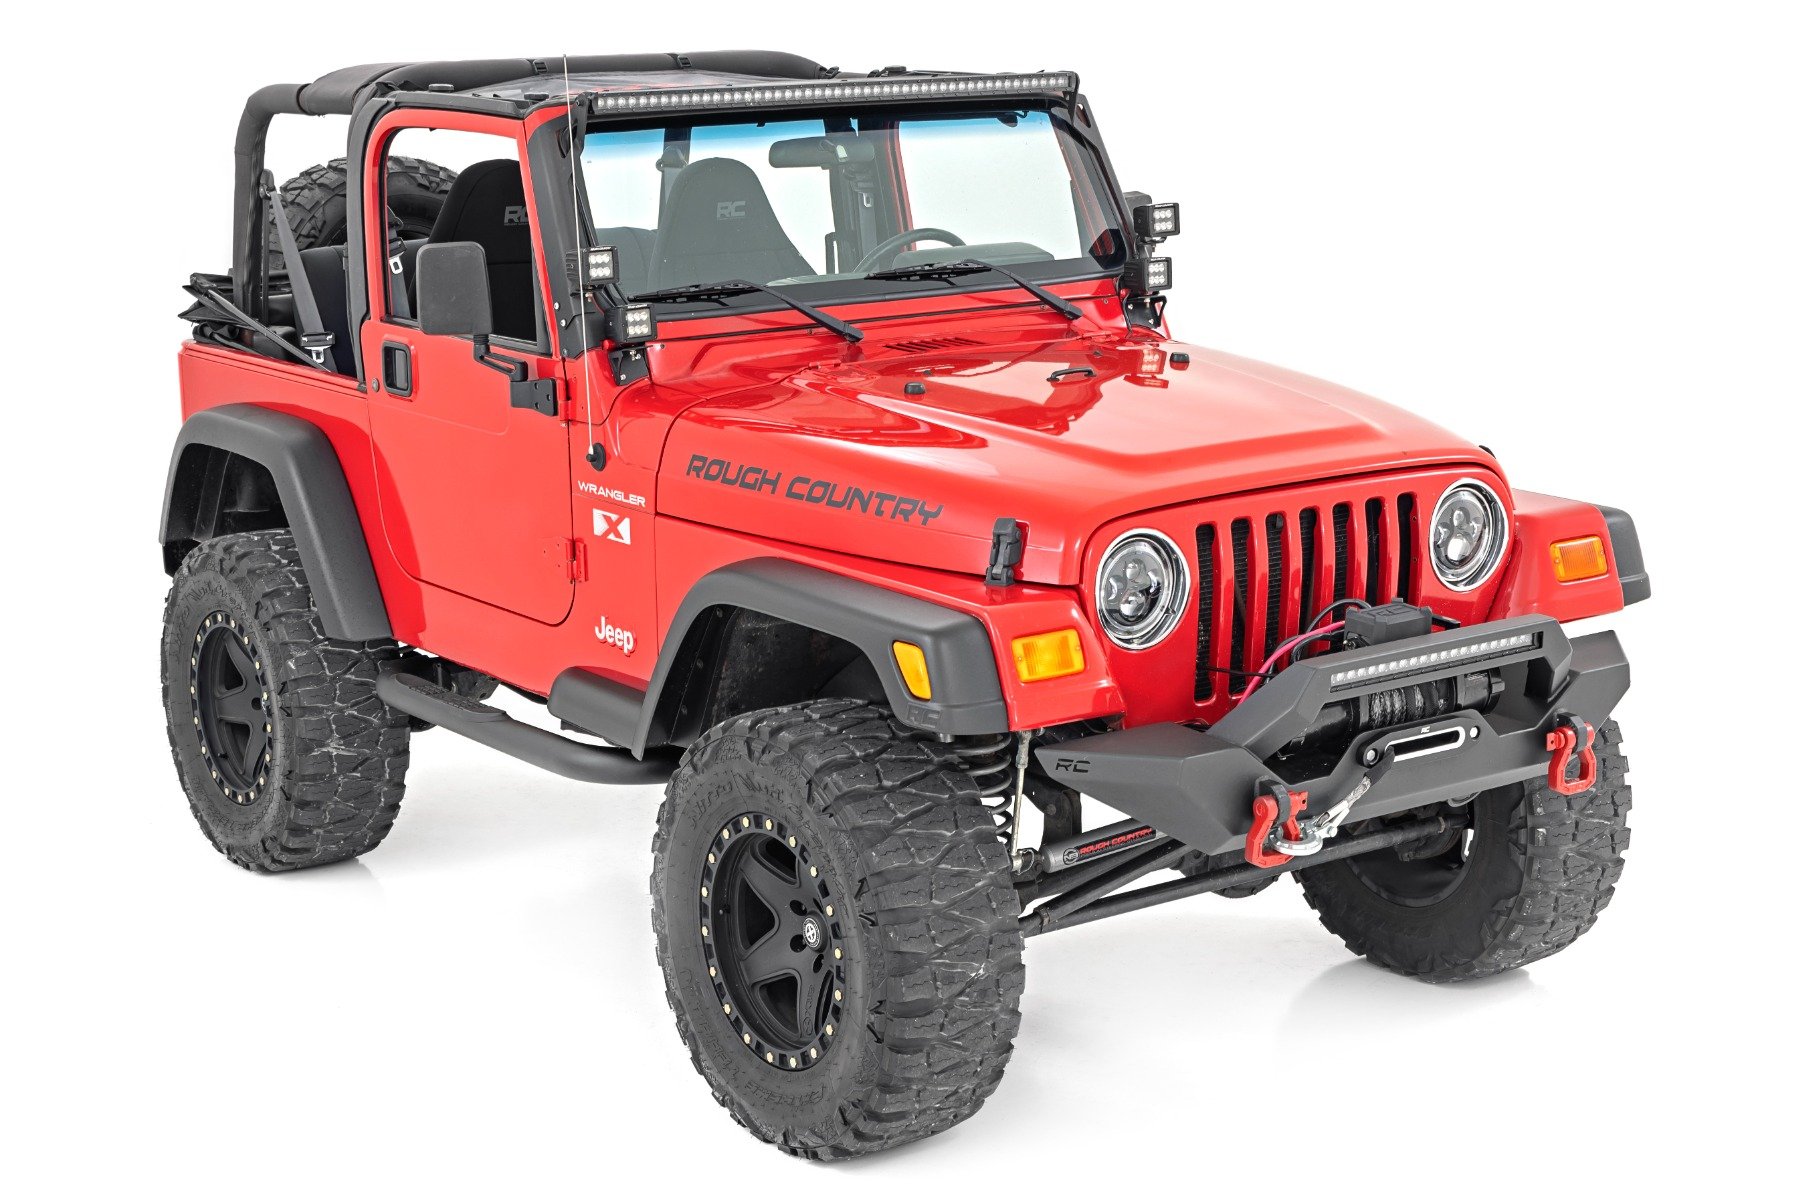 Rough Country Nerf Bar | 3inch tube | Jeep Wrangler TJ (97-06)/Wrangler YJ  (87-95) – Offroad Armor | Offroad Accessories